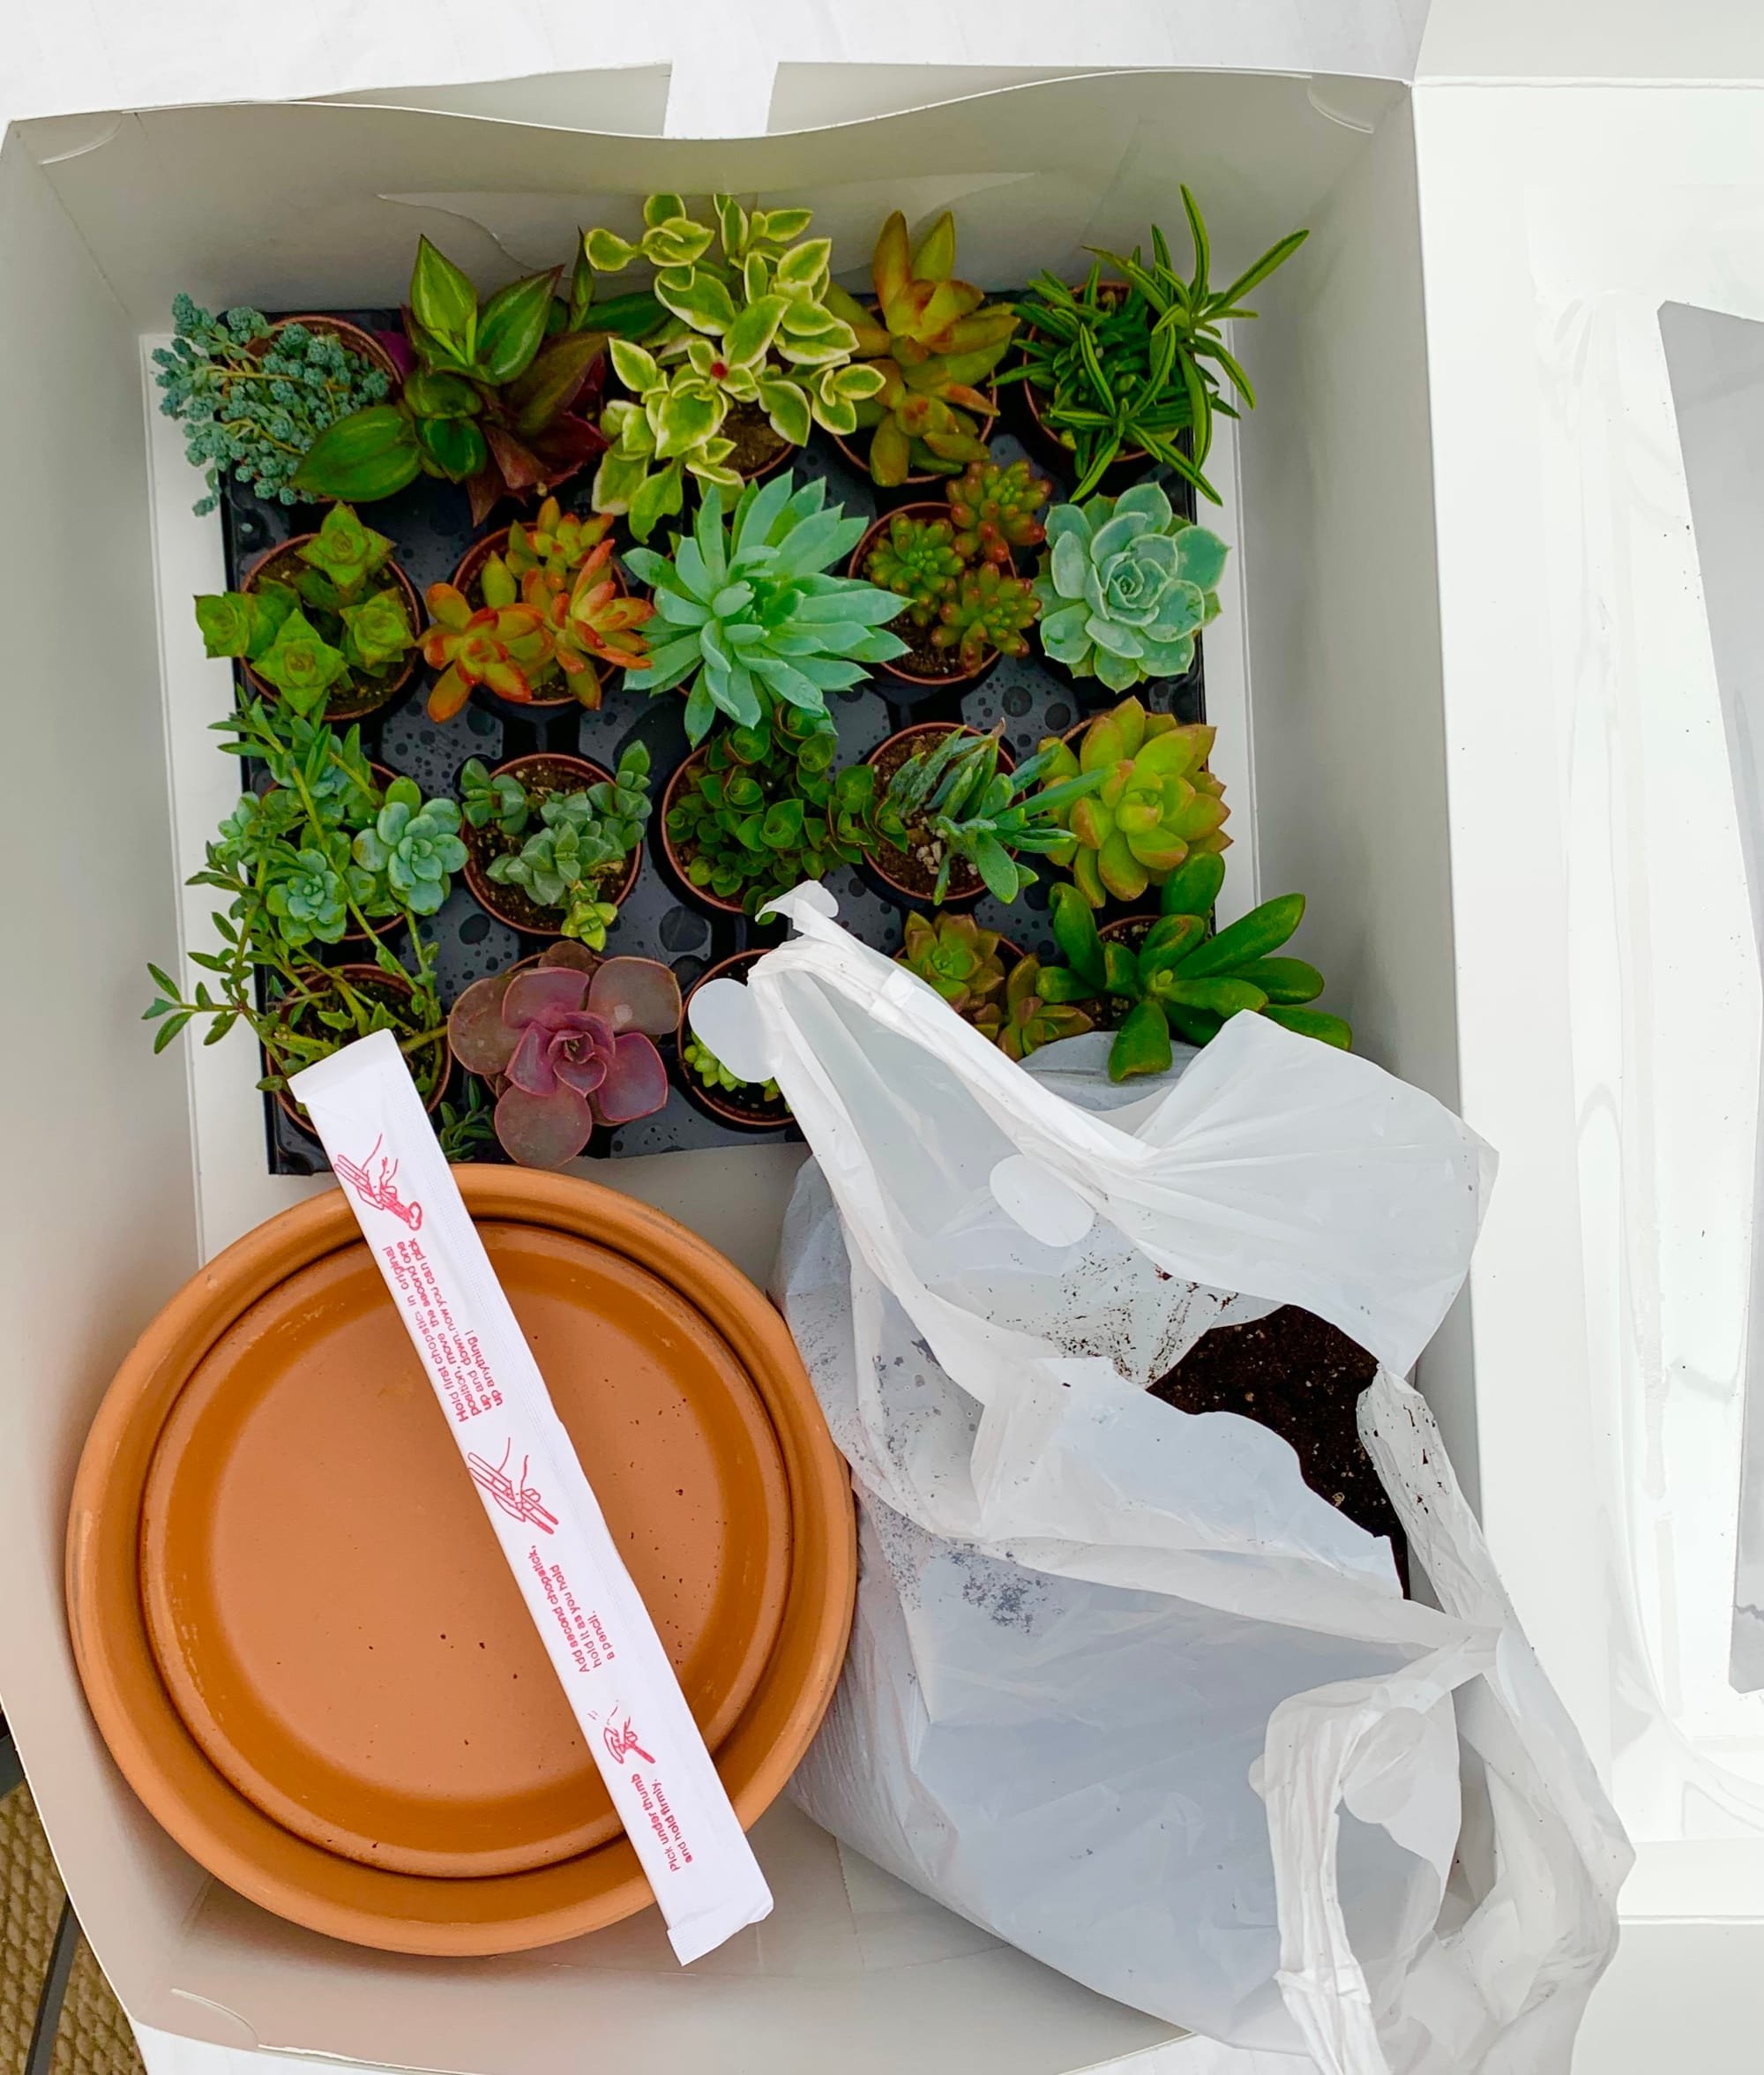 SUCCULENT BOWL or KIDS ANIMAL or LIVING WALL CLASS KITS TO DO AT HOME